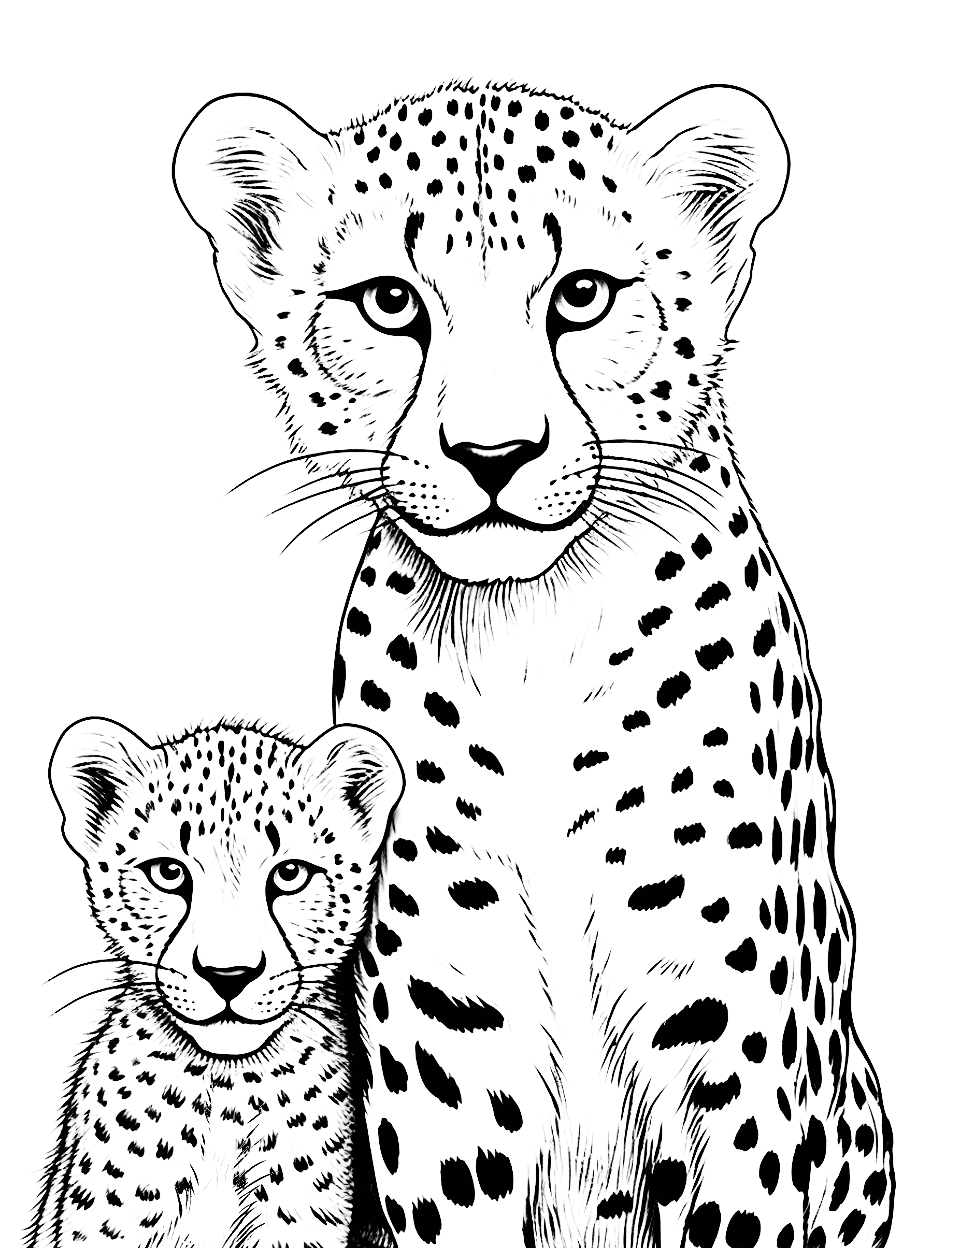 Cheetah Cub with Mother Coloring Page - A heartwarming scene of a cheetah cub snuggling with its mother.